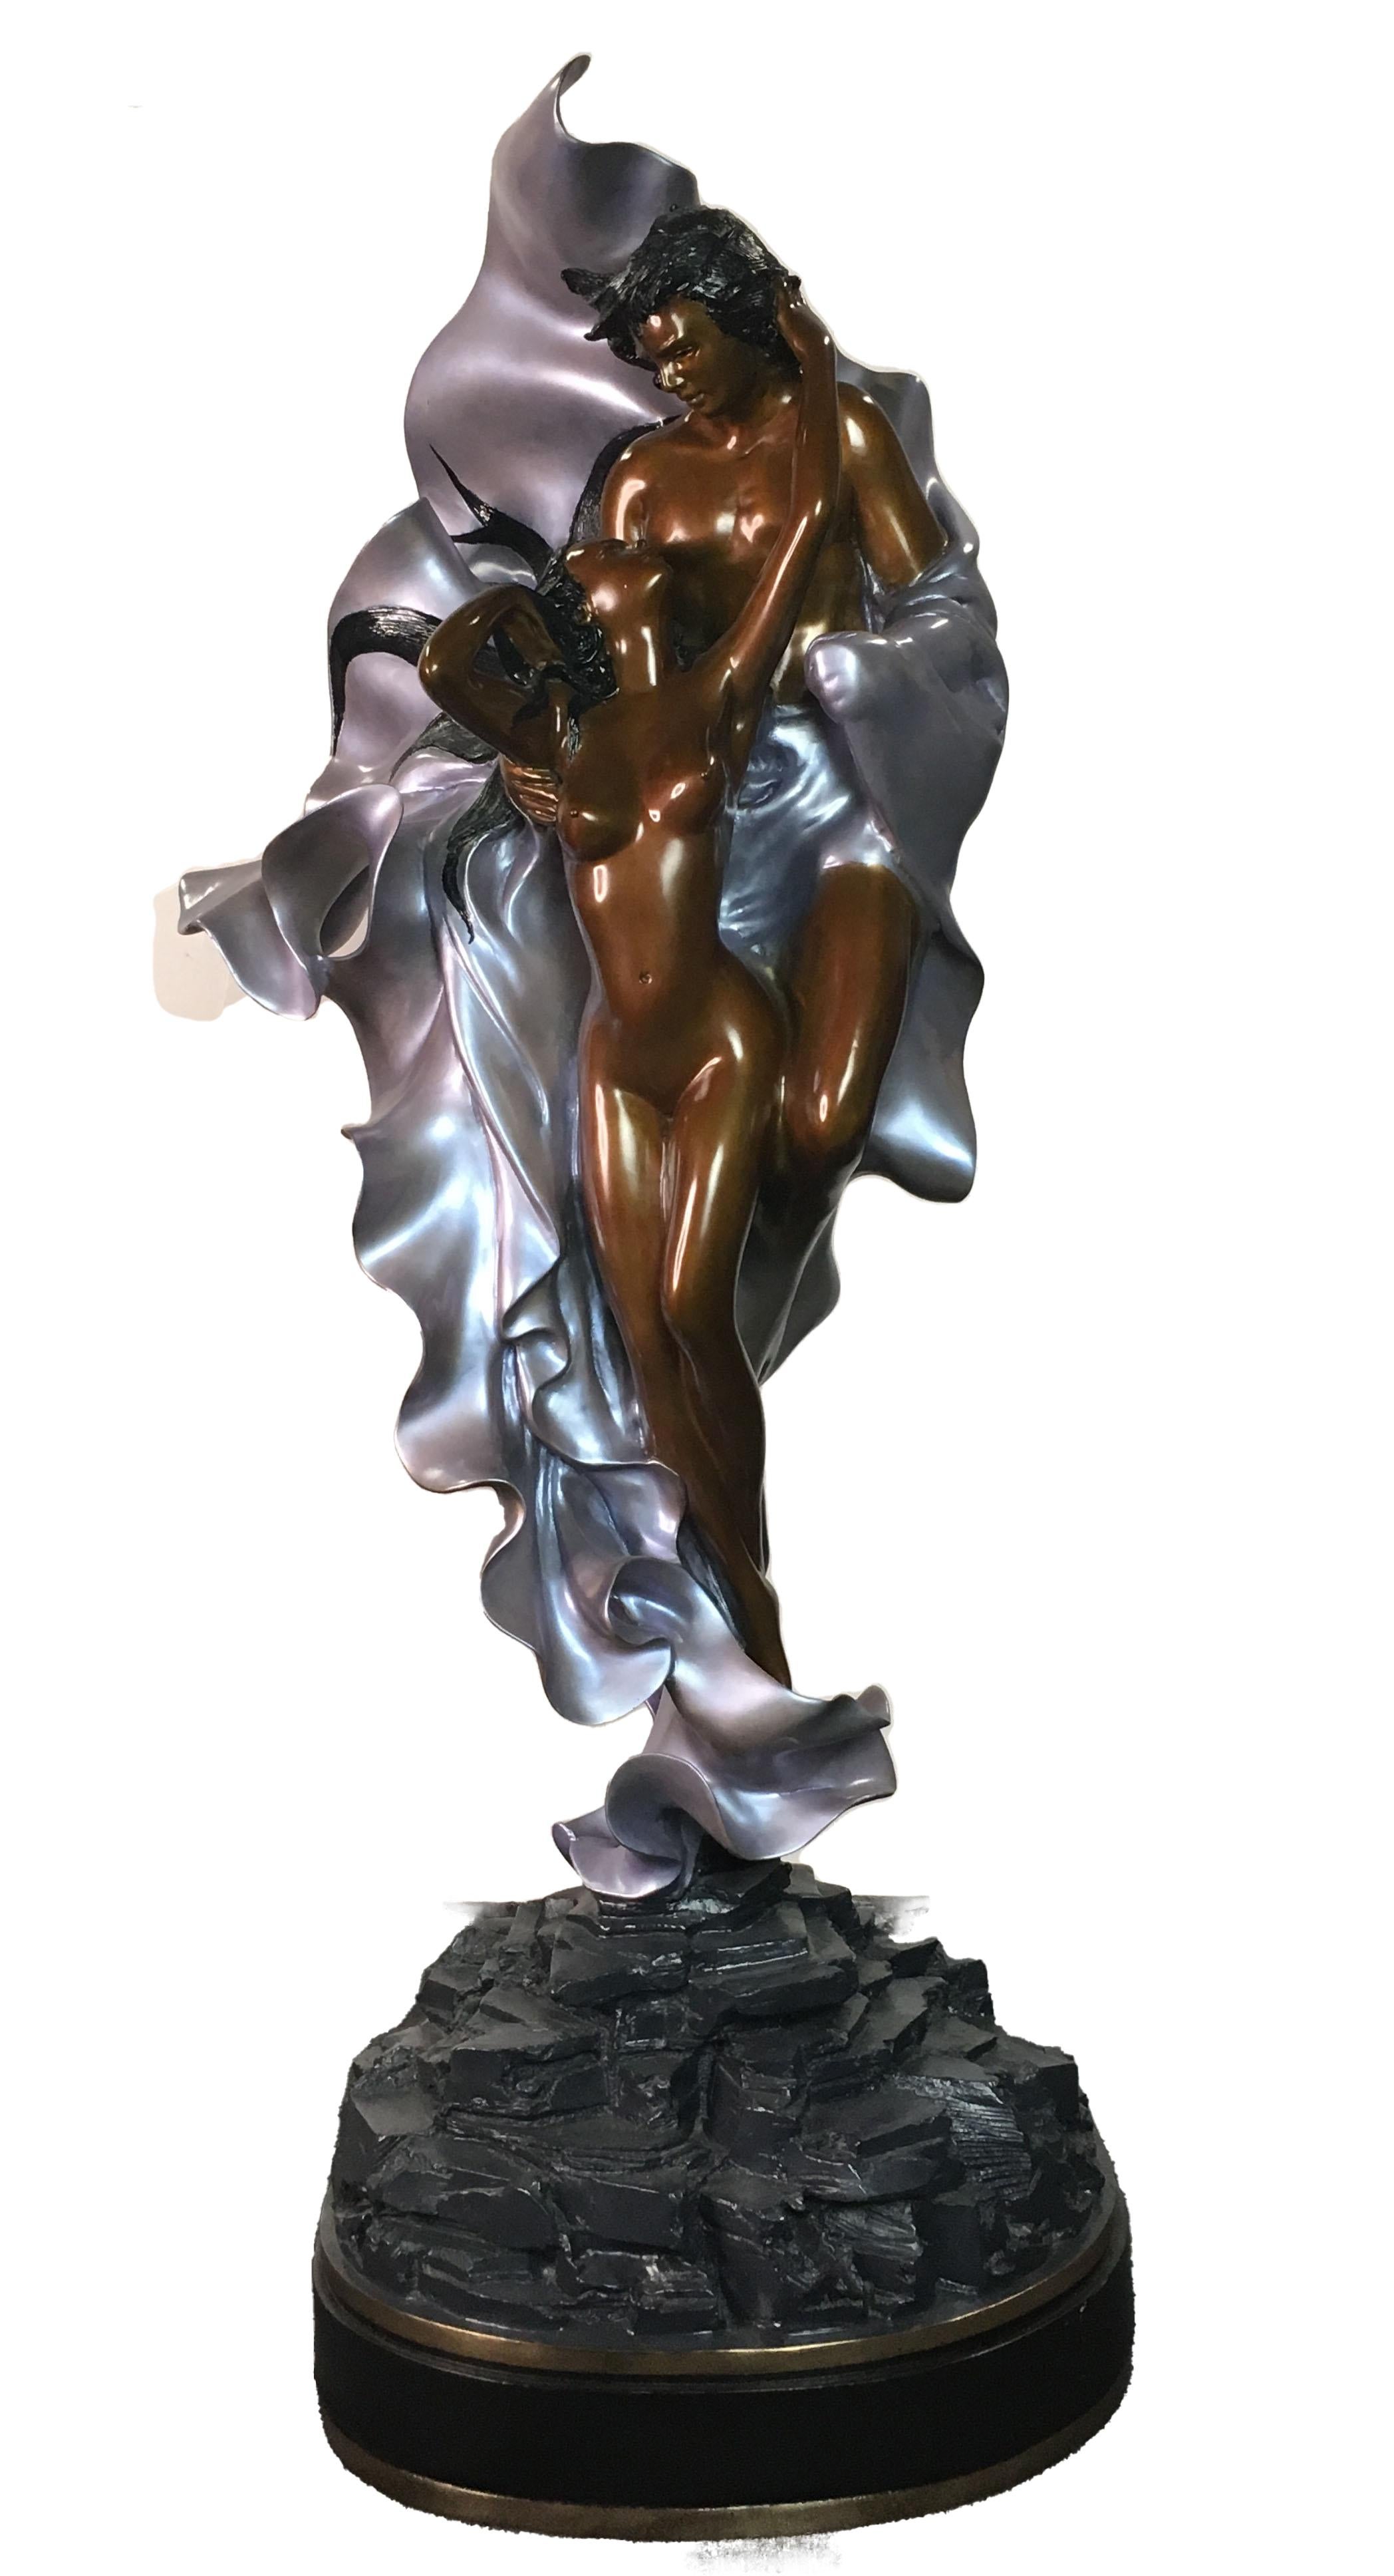 Angelo Basso Figurative Sculpture - Paolo And Francesca